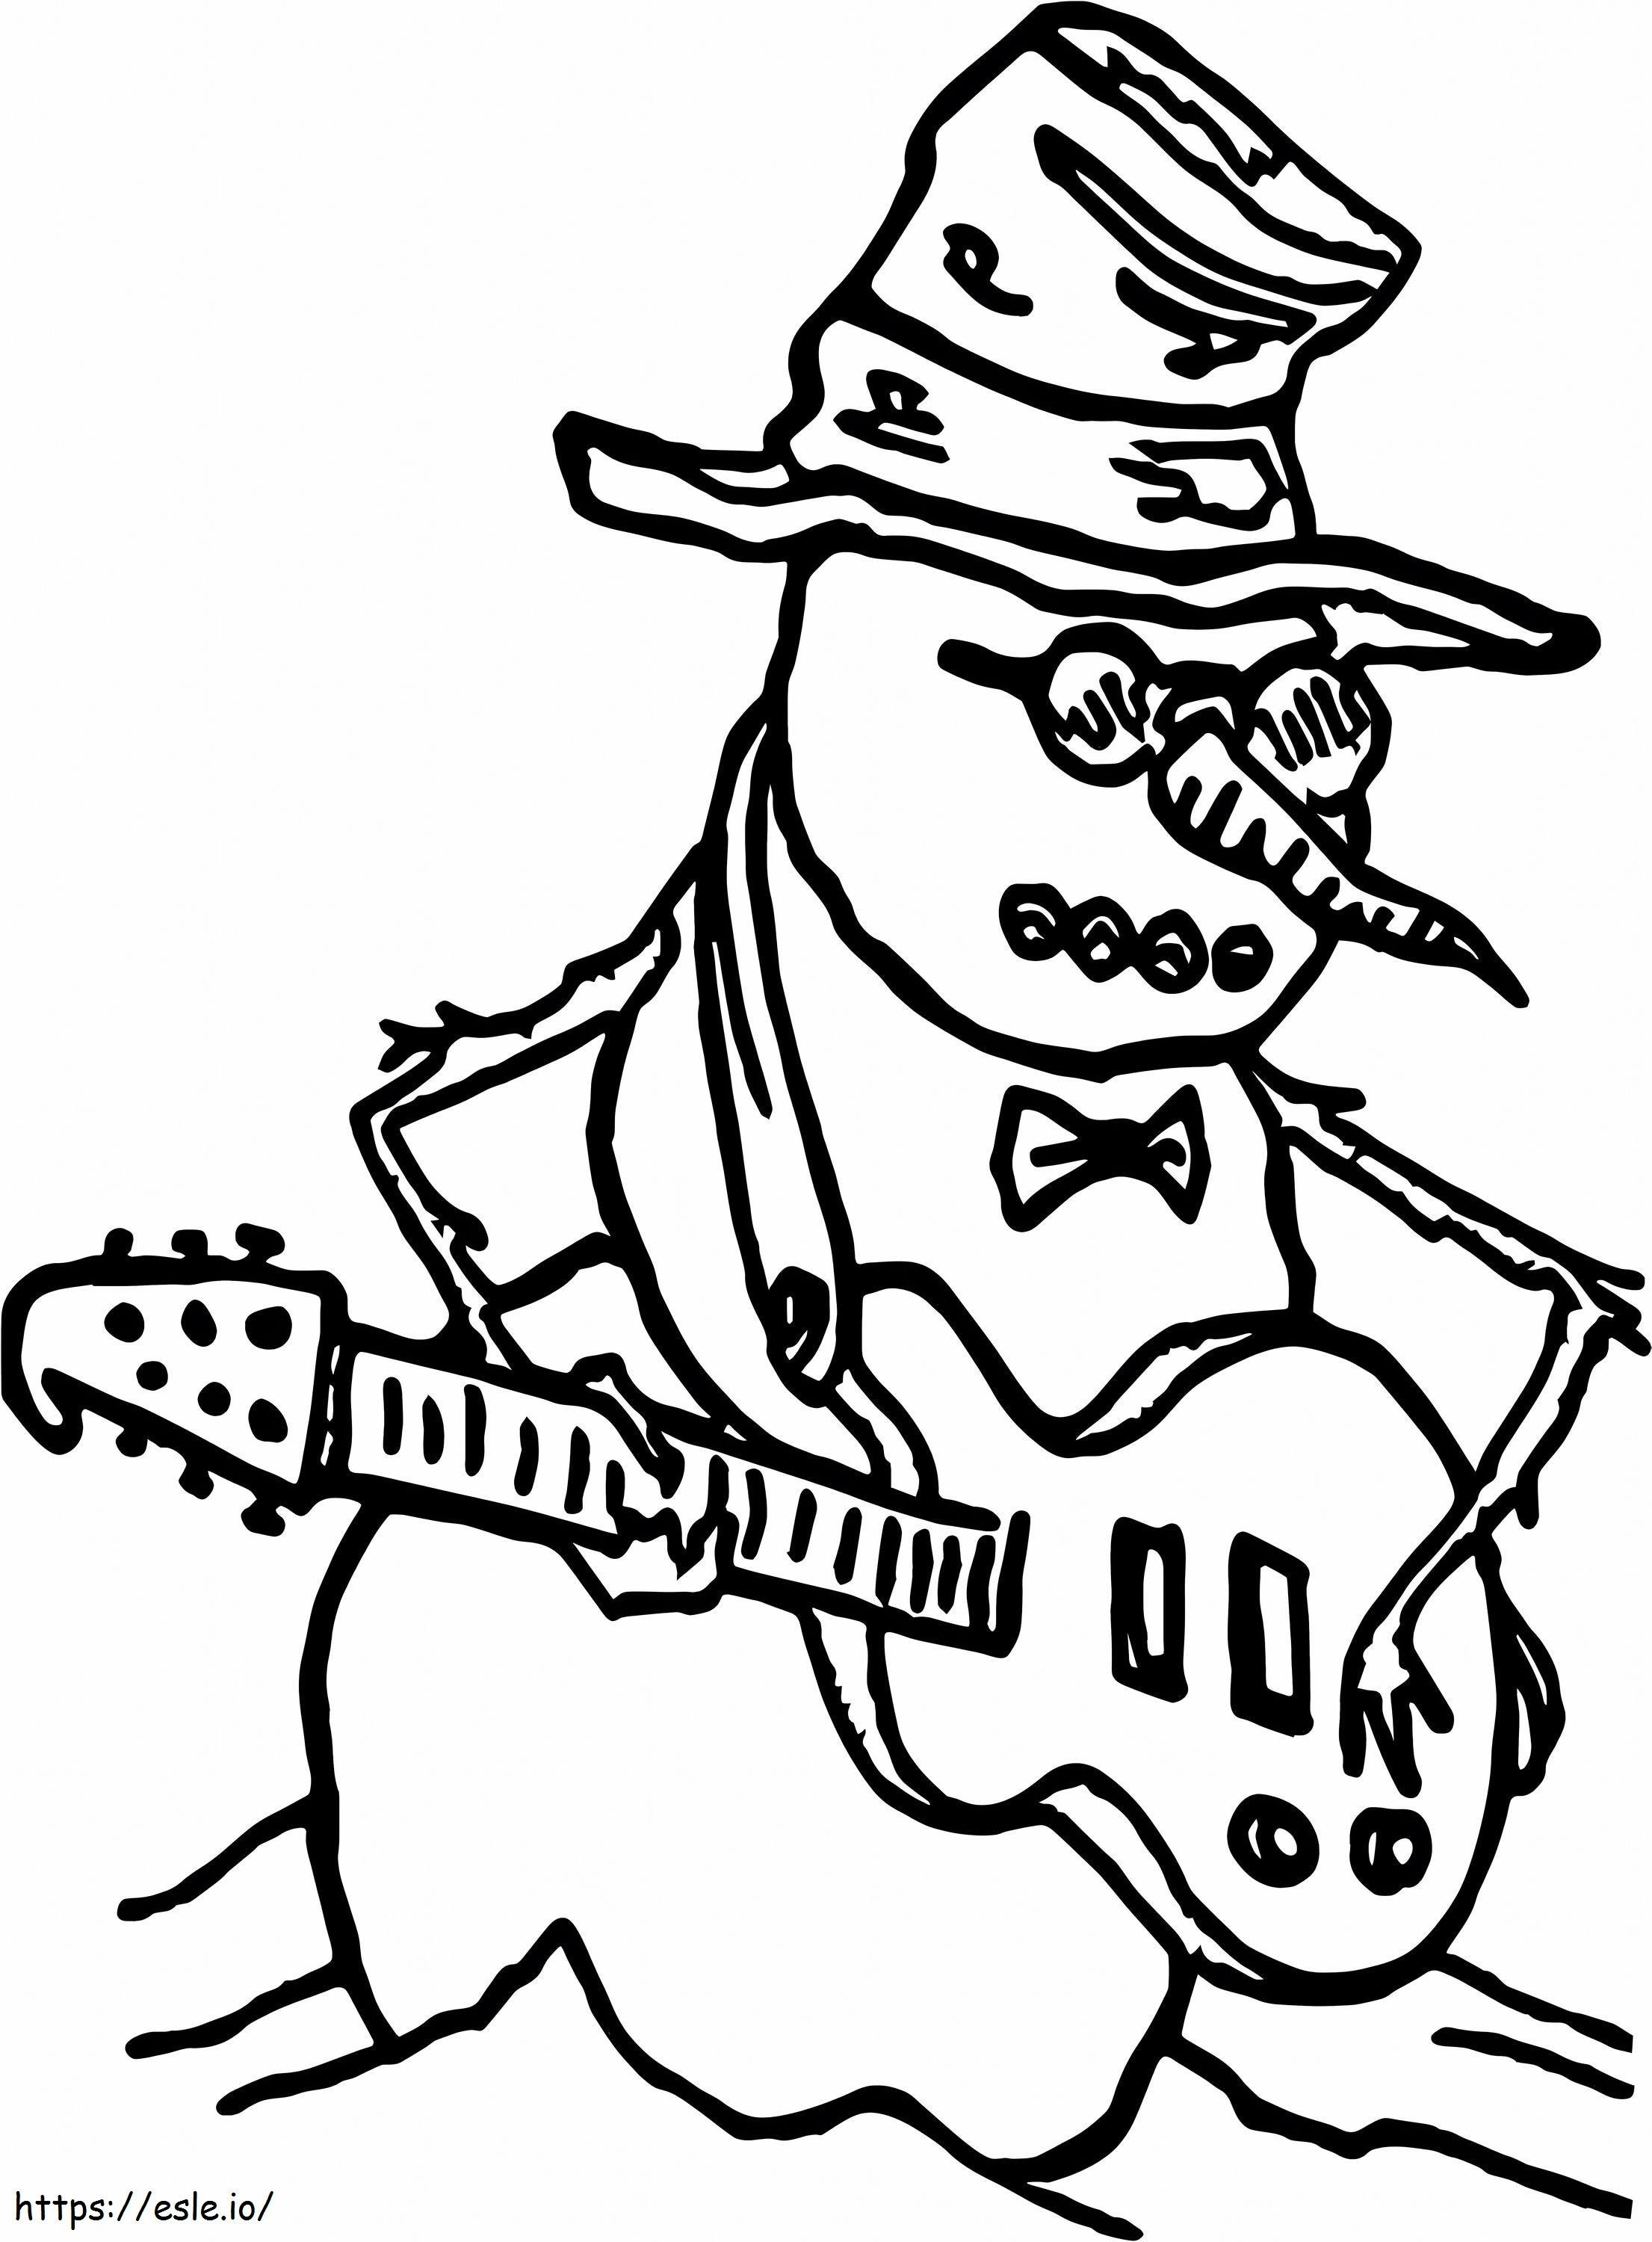 Snowmen Play Guitar coloring page